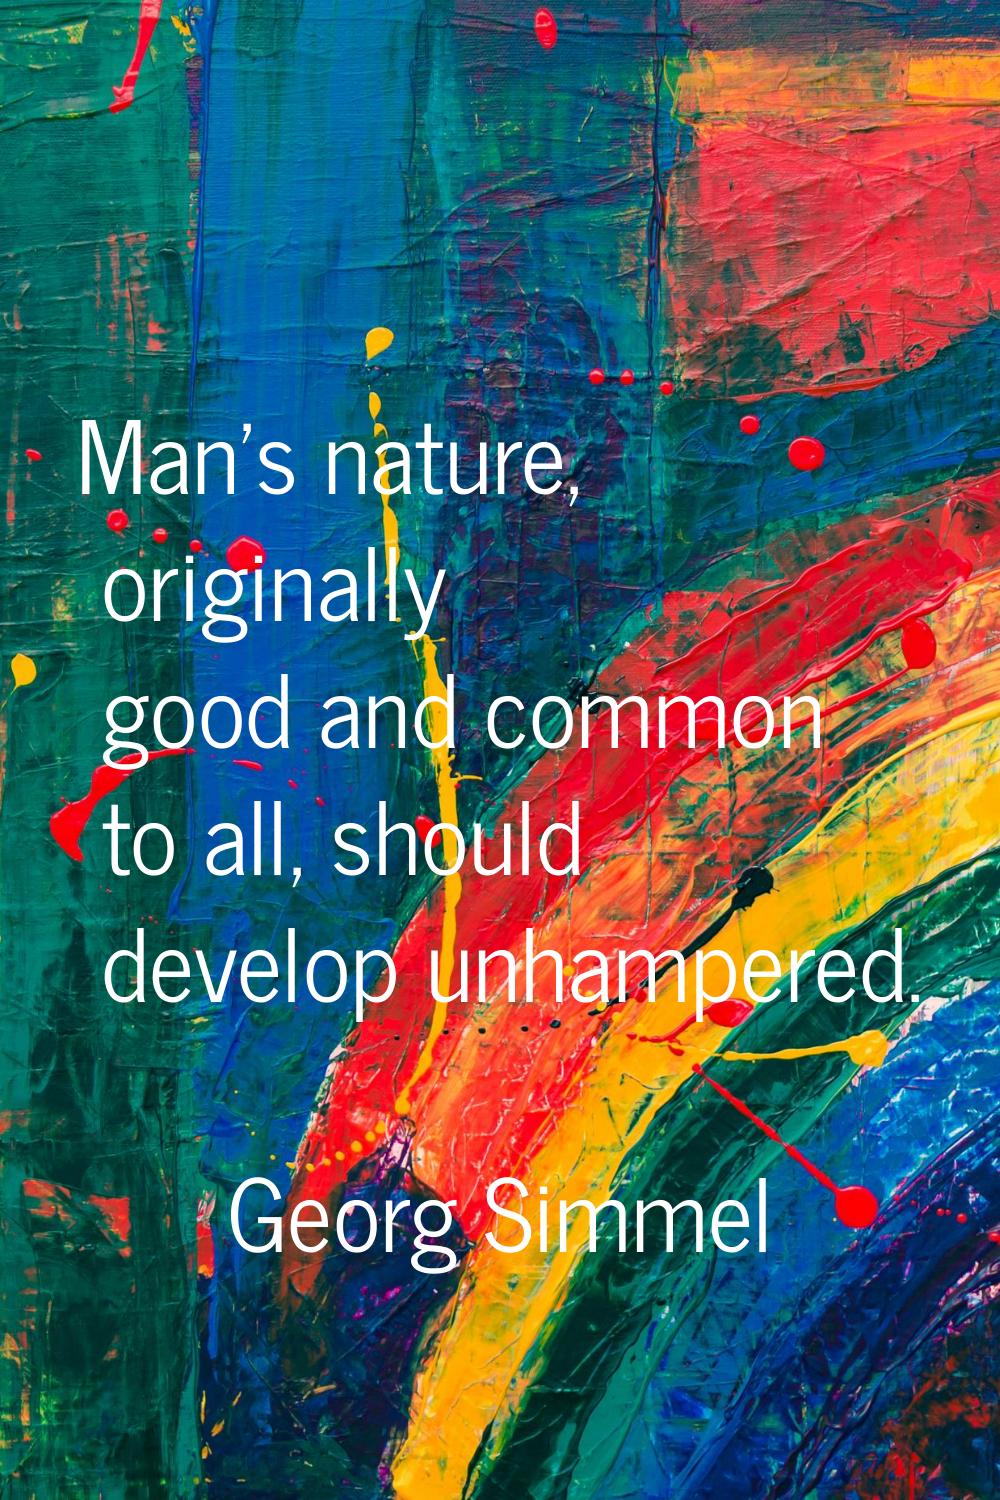 Man's nature, originally good and common to all, should develop unhampered.